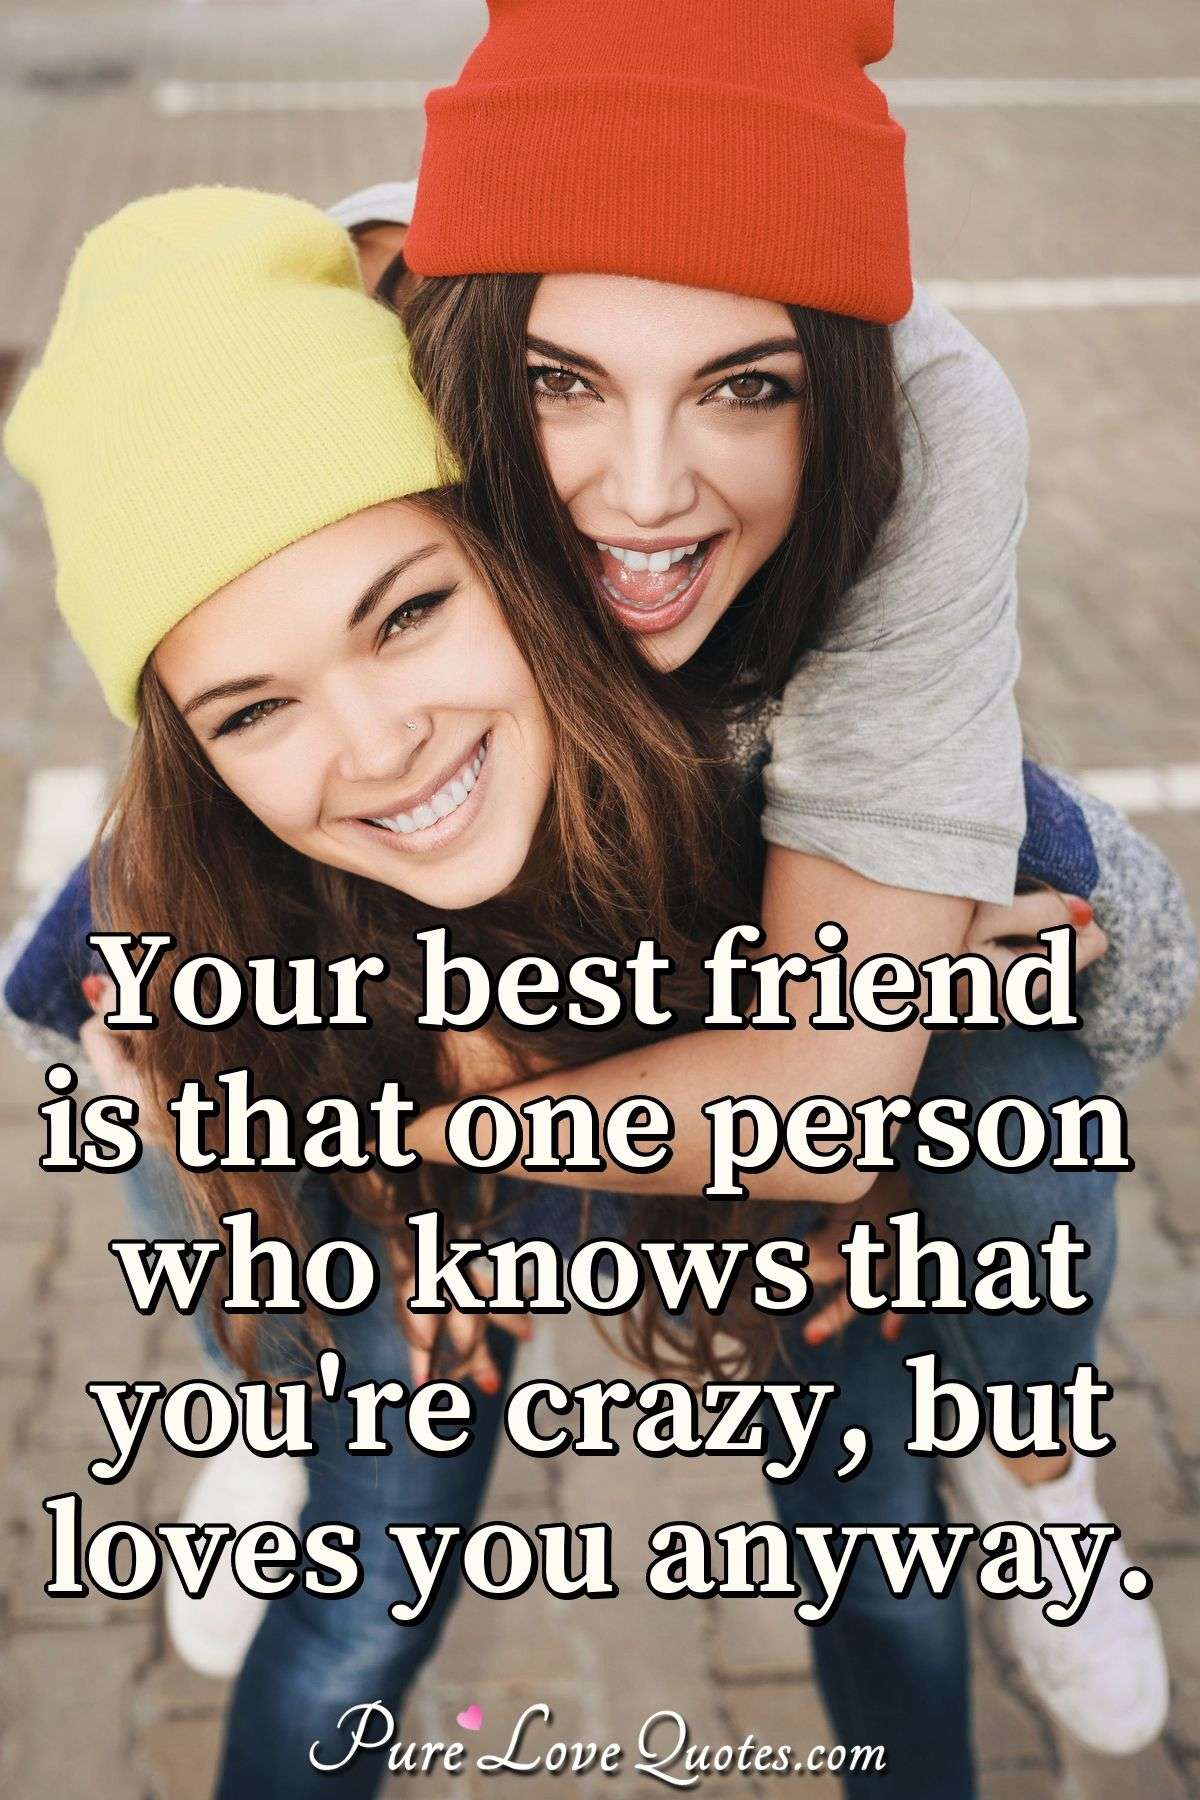 Your best friend is that one person who knows that you're crazy but loves you anyway. - Anonymous